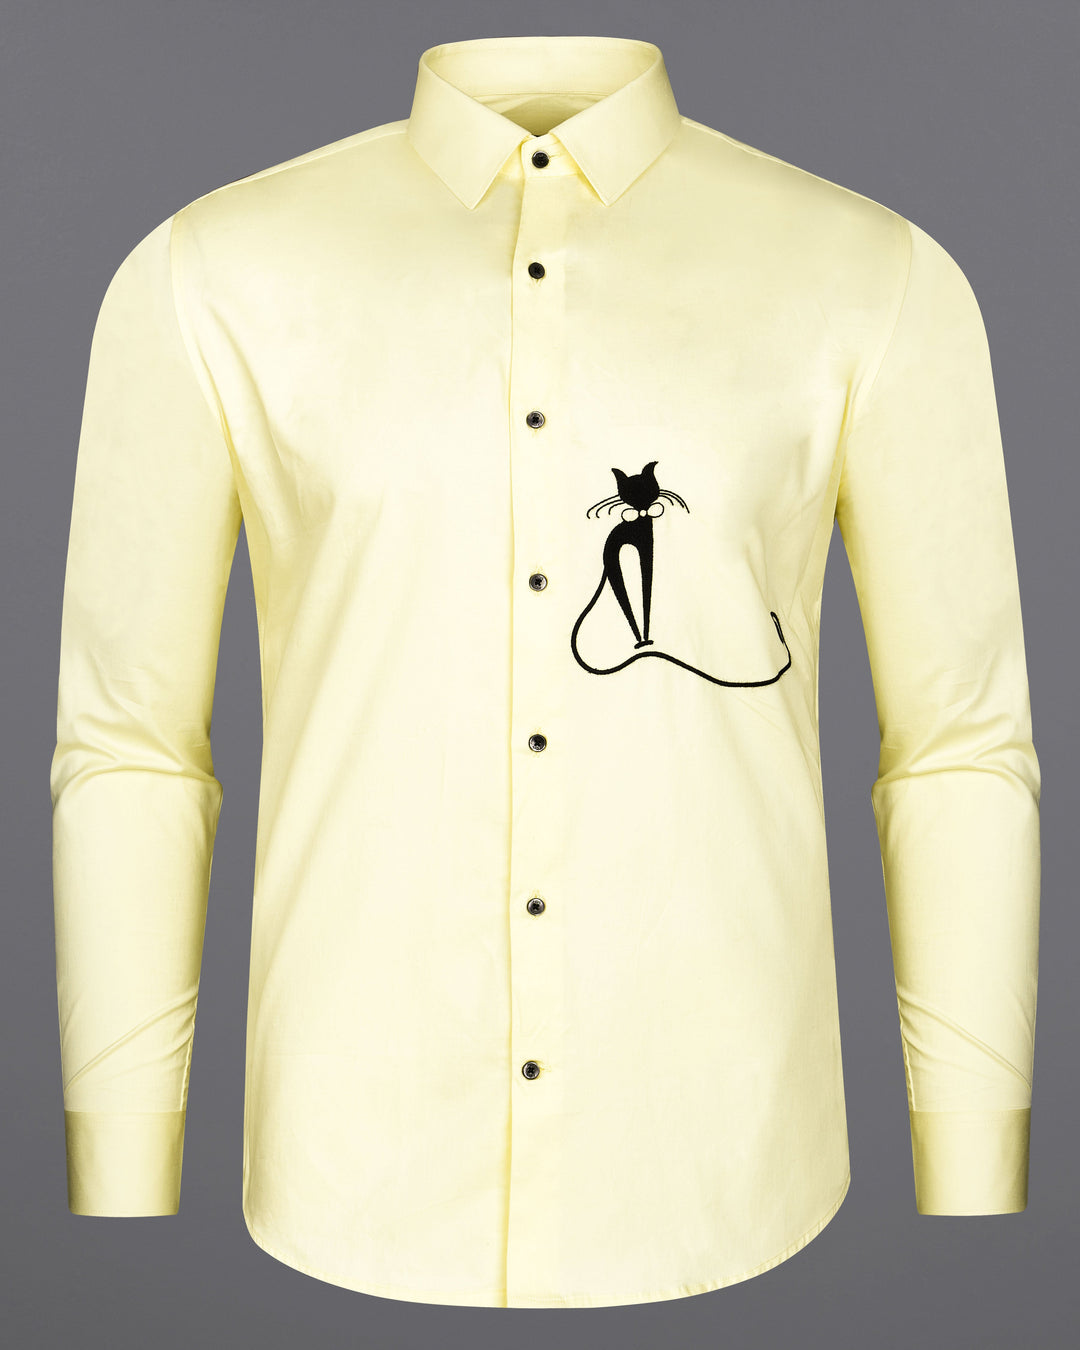 12 Yellow T-shirt Combination For Men - What To Wear With A Yellow